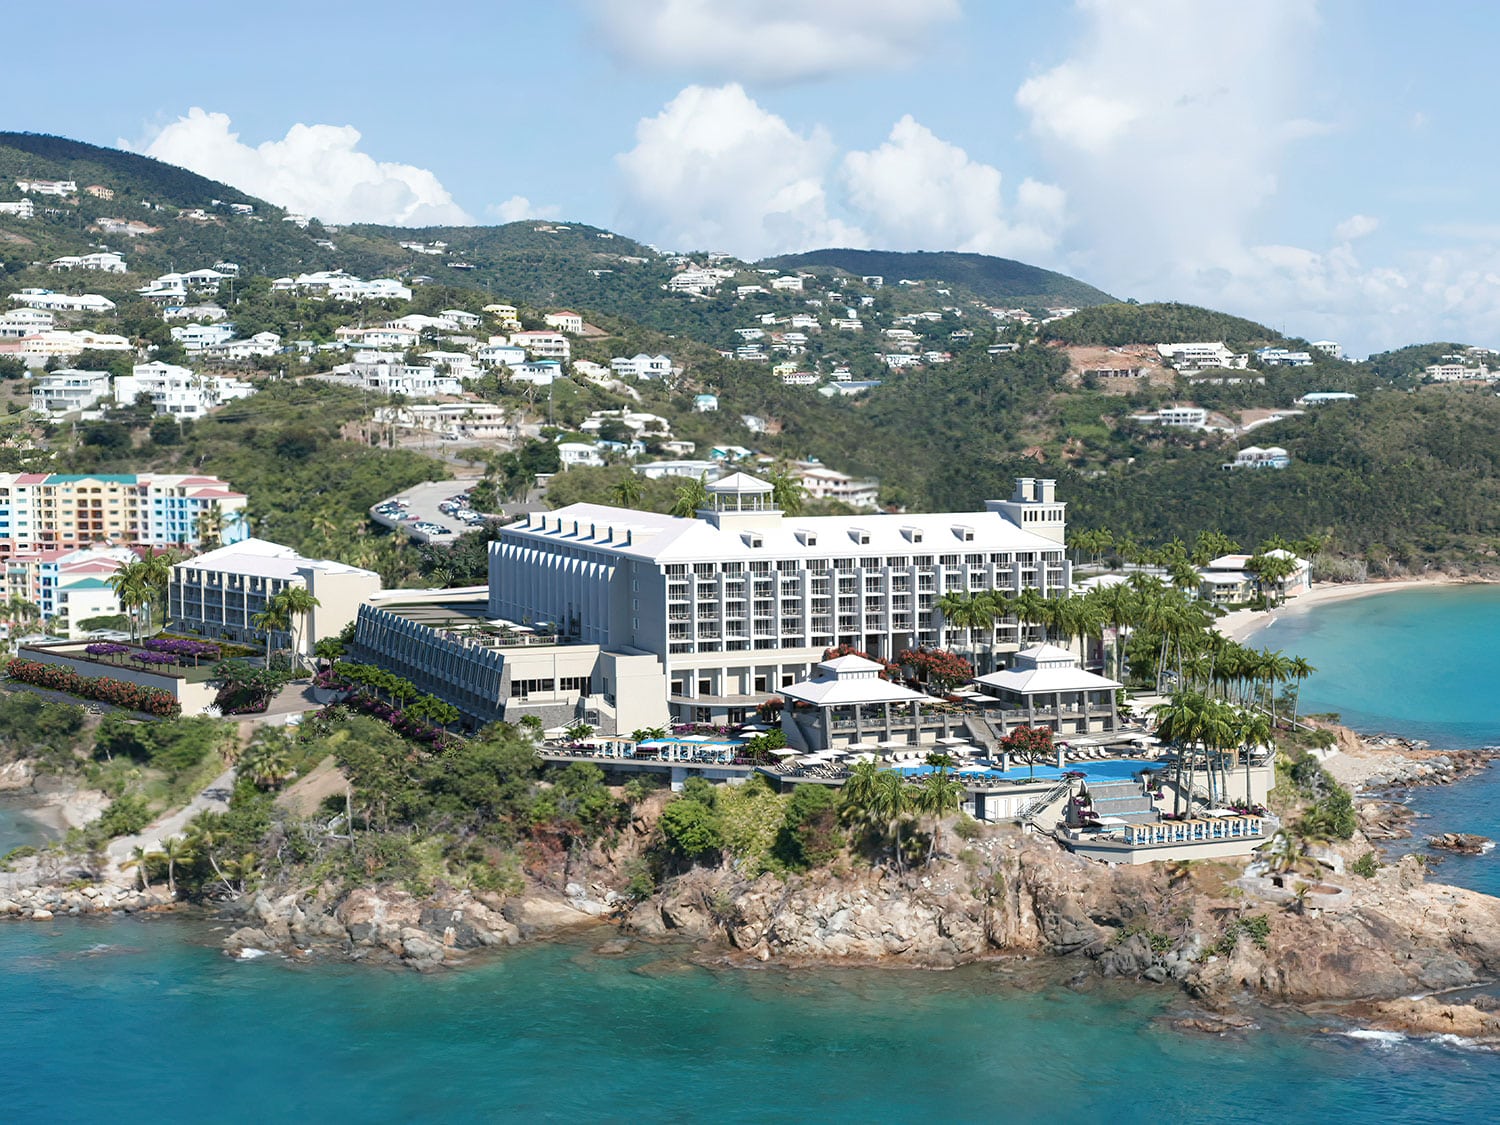 An aerial view of the new Westin Beach Resort and Spa at Frenchman’s Reef in St. Thomas, U.S. Virgin Islands.